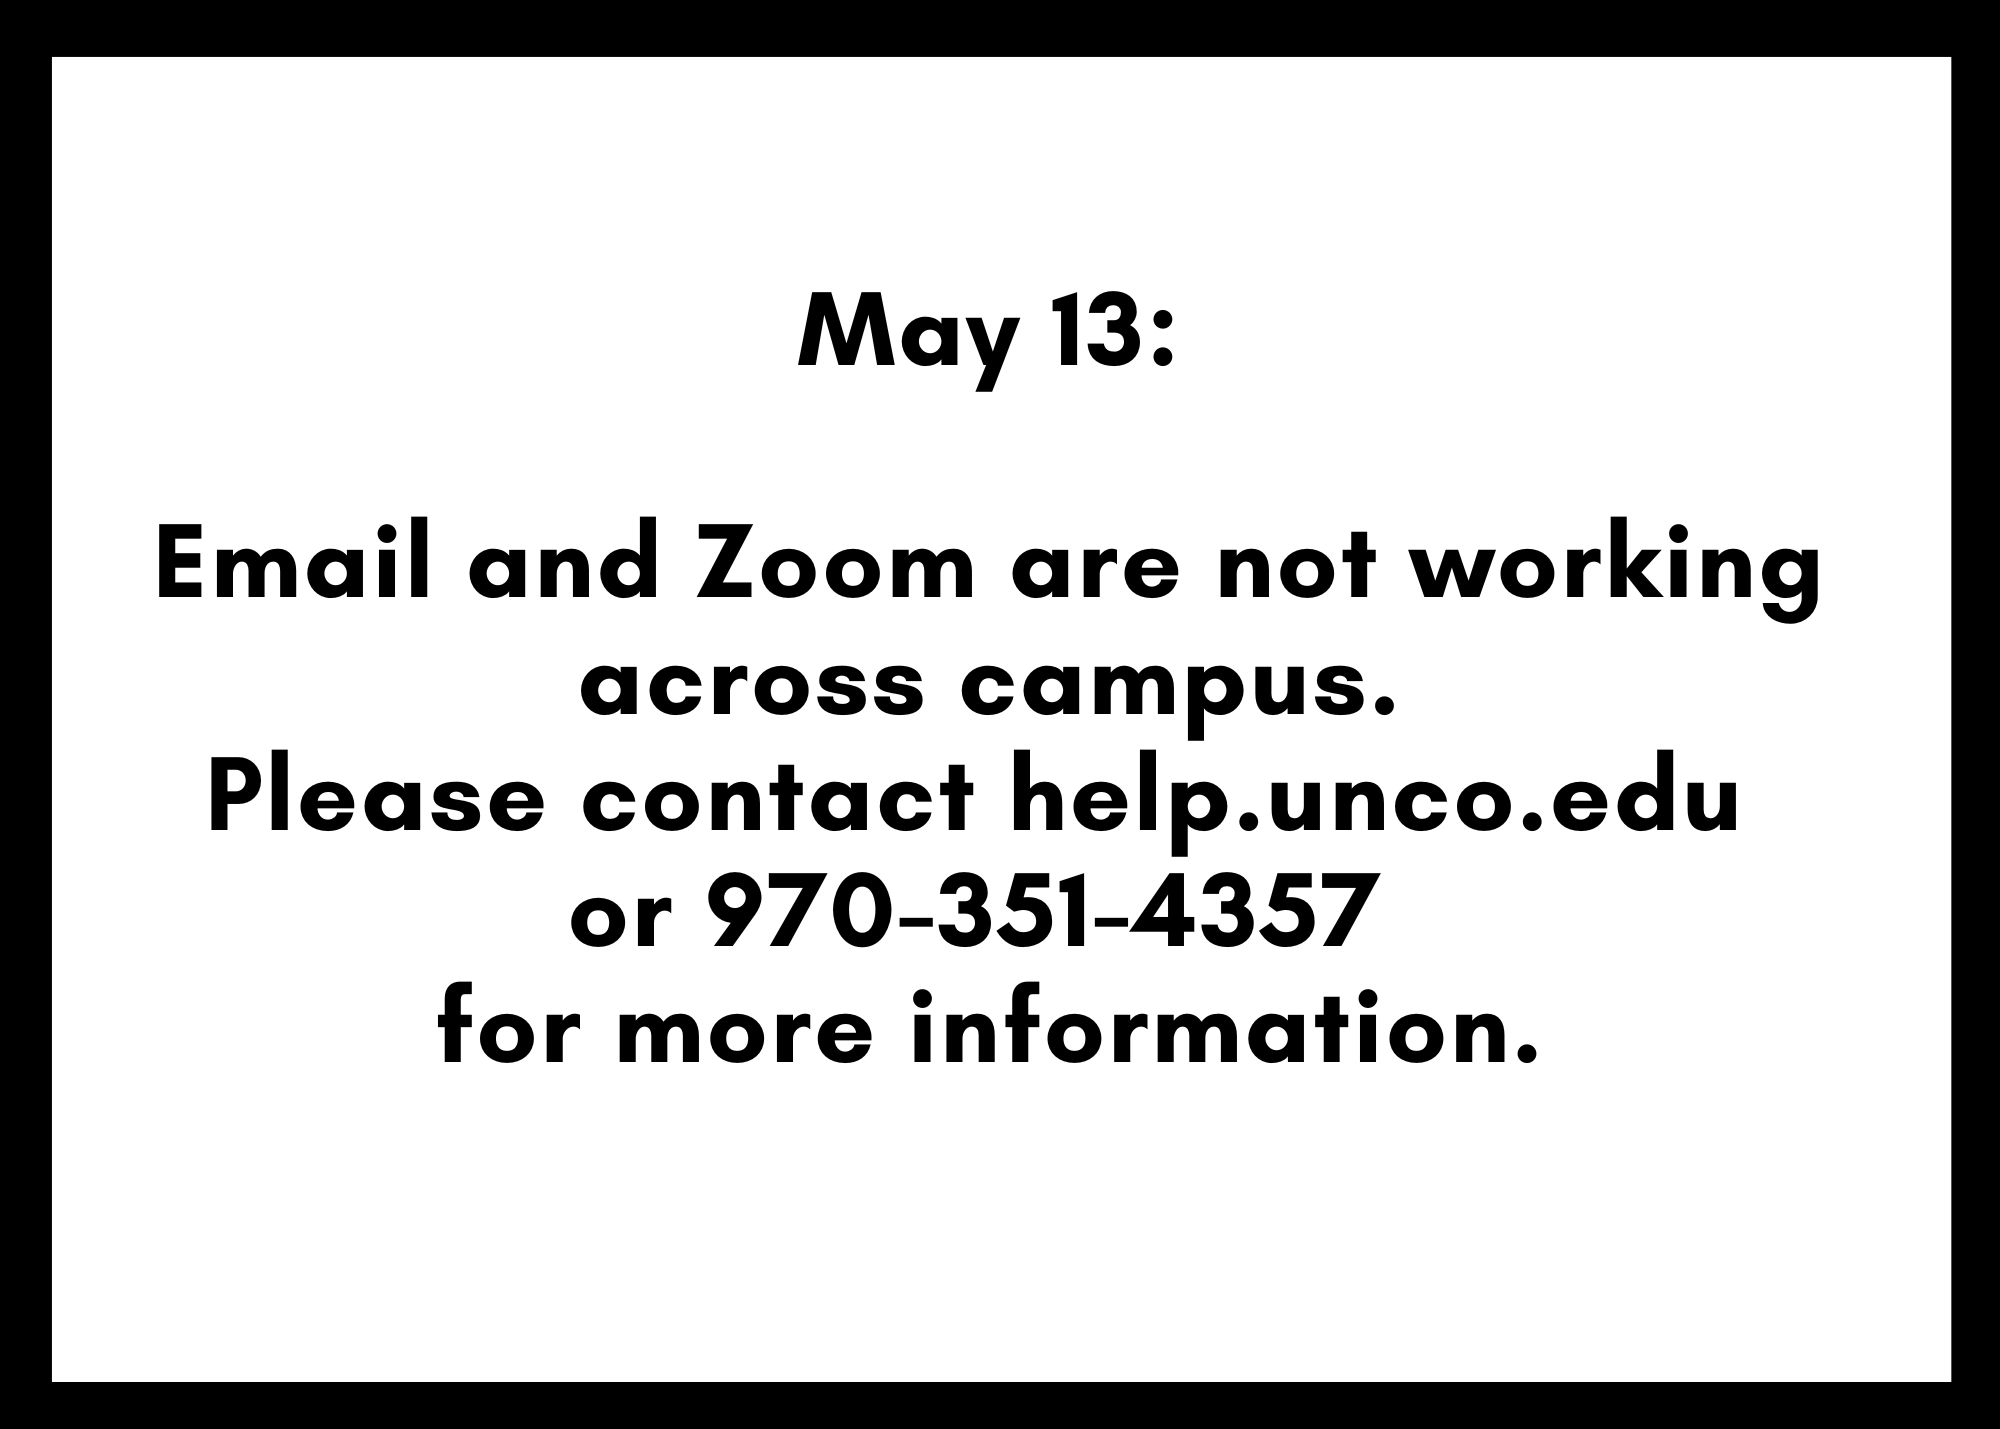 Email outage May 13